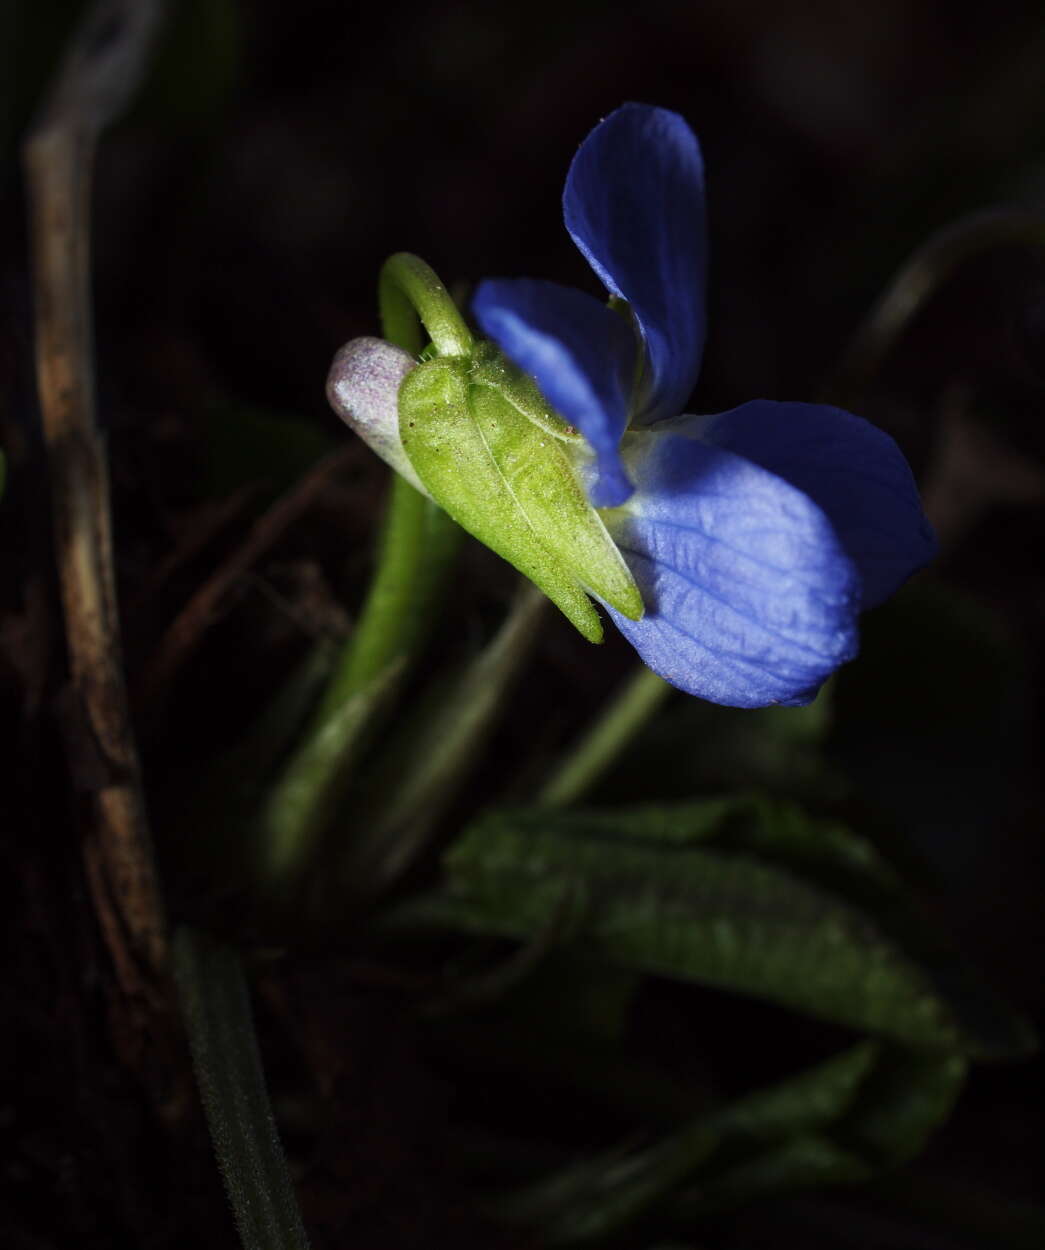 Image of Russian Violet